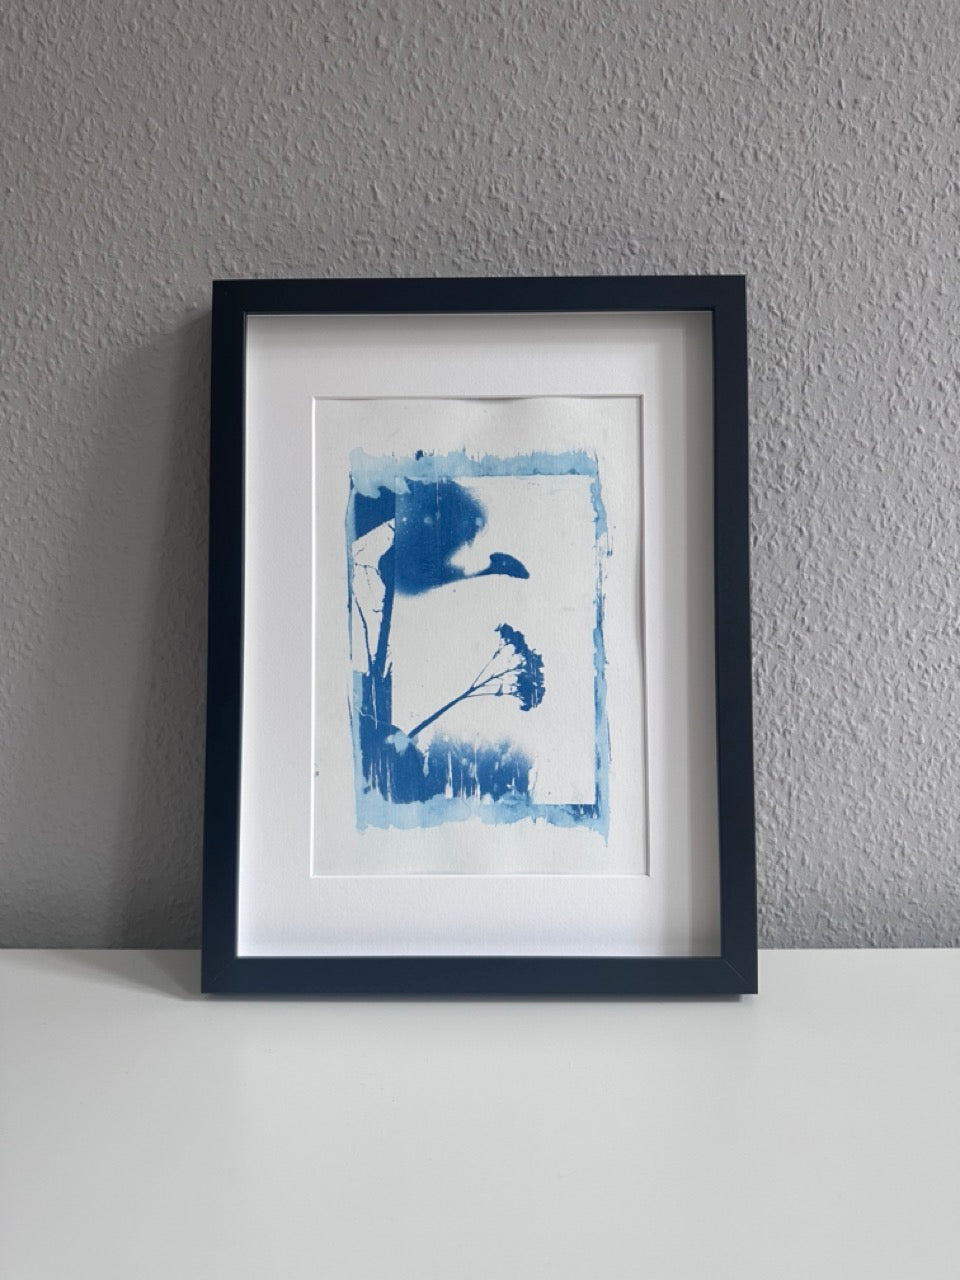 Know my hunger (Original Cyanotype on Hahnemühle 24x32)